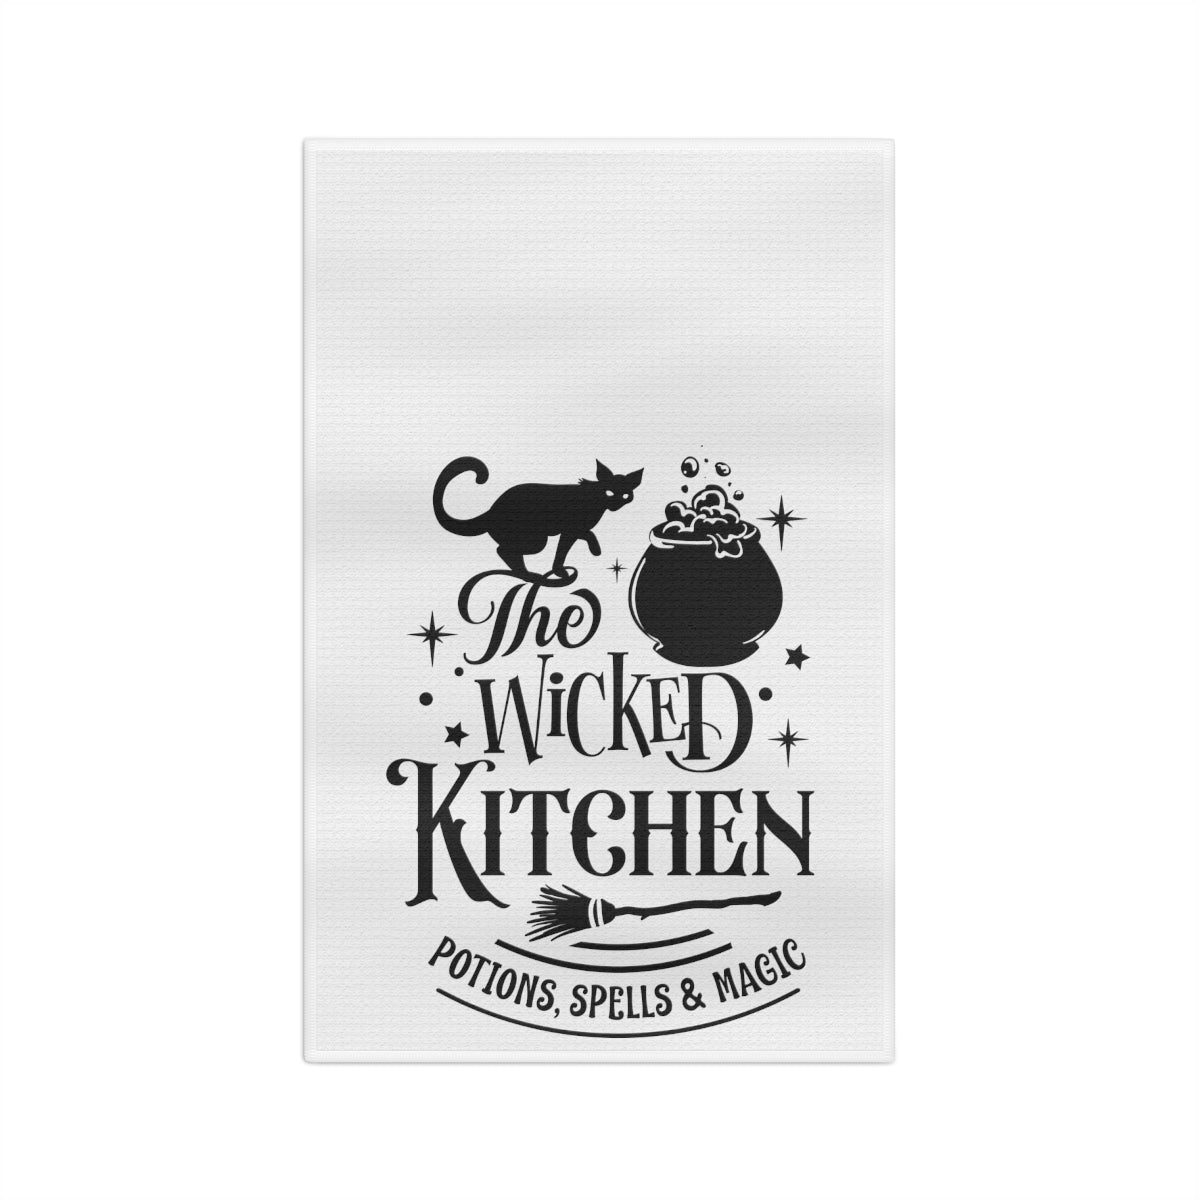 Wicked Kitchen Tea Towel - Witchy Kitchens